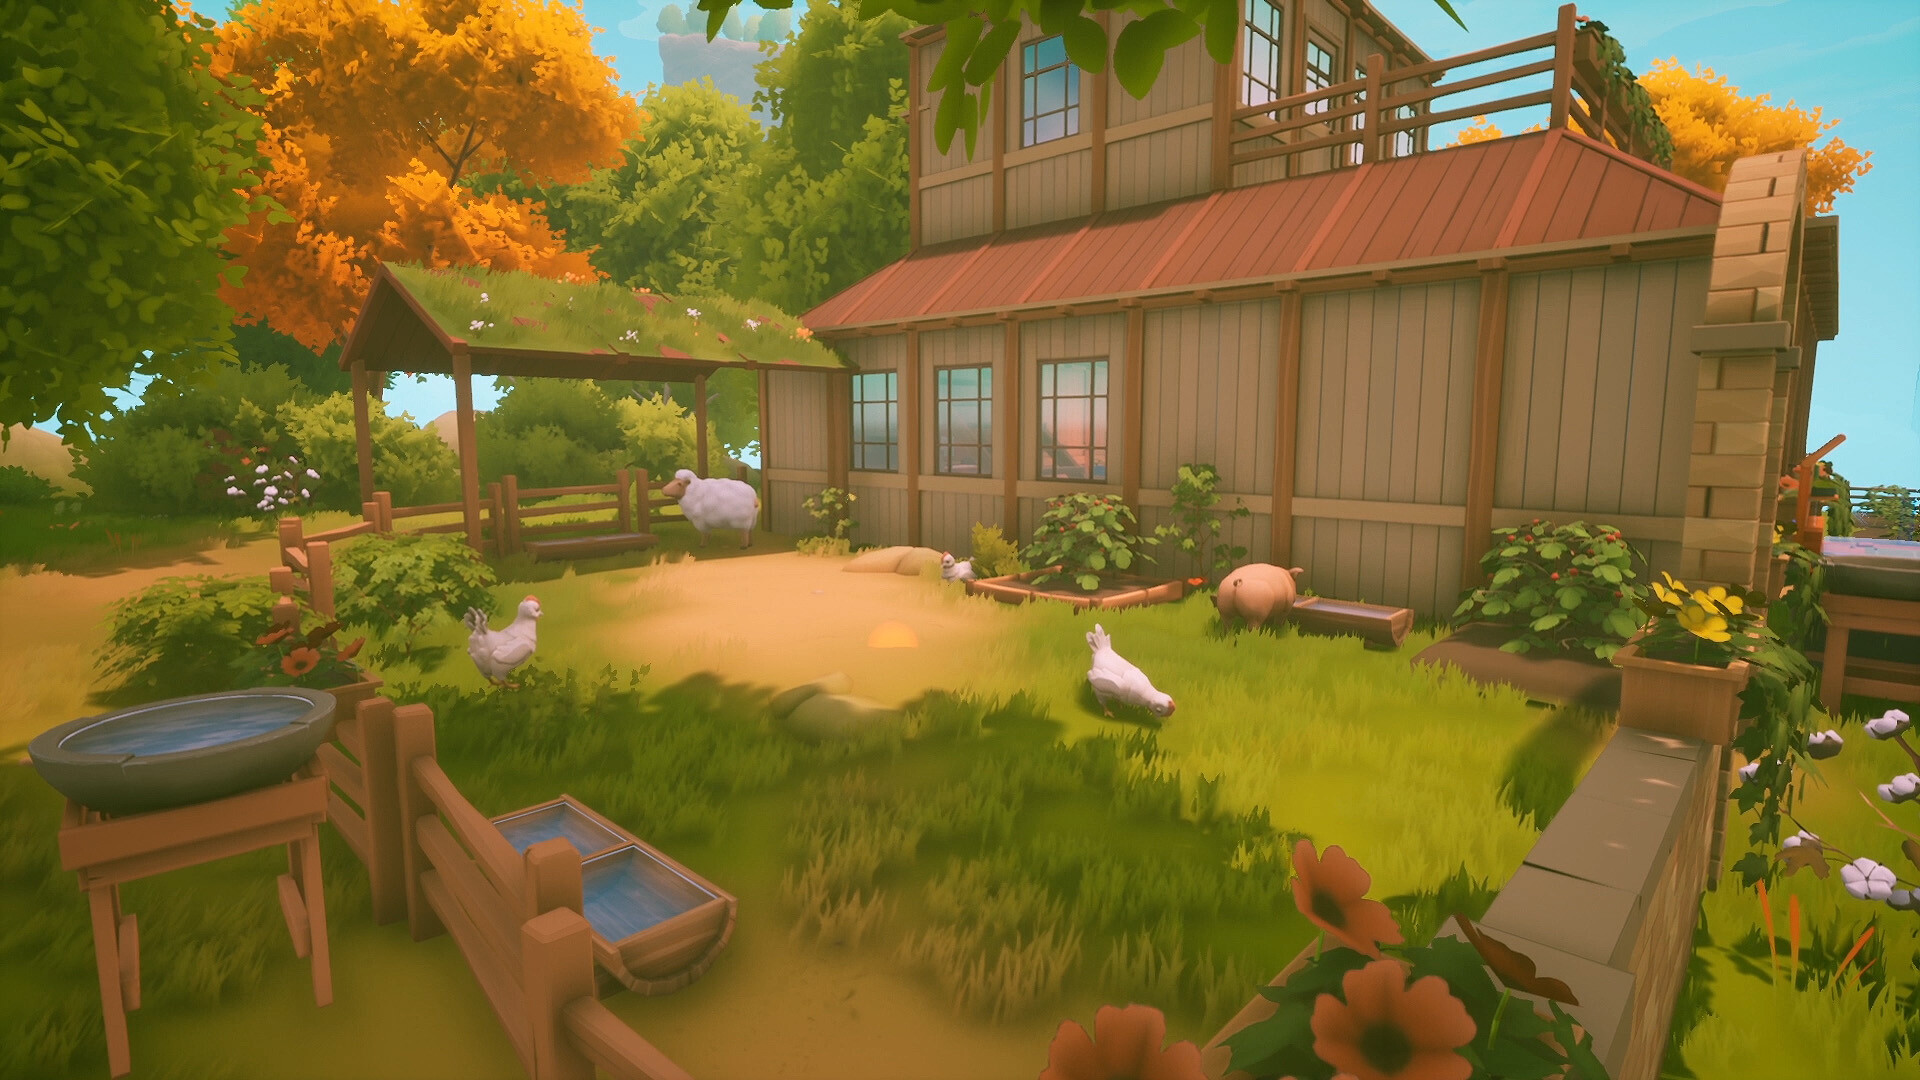 Our survival crafting game Solarpunk will launch its Kickstarter campa